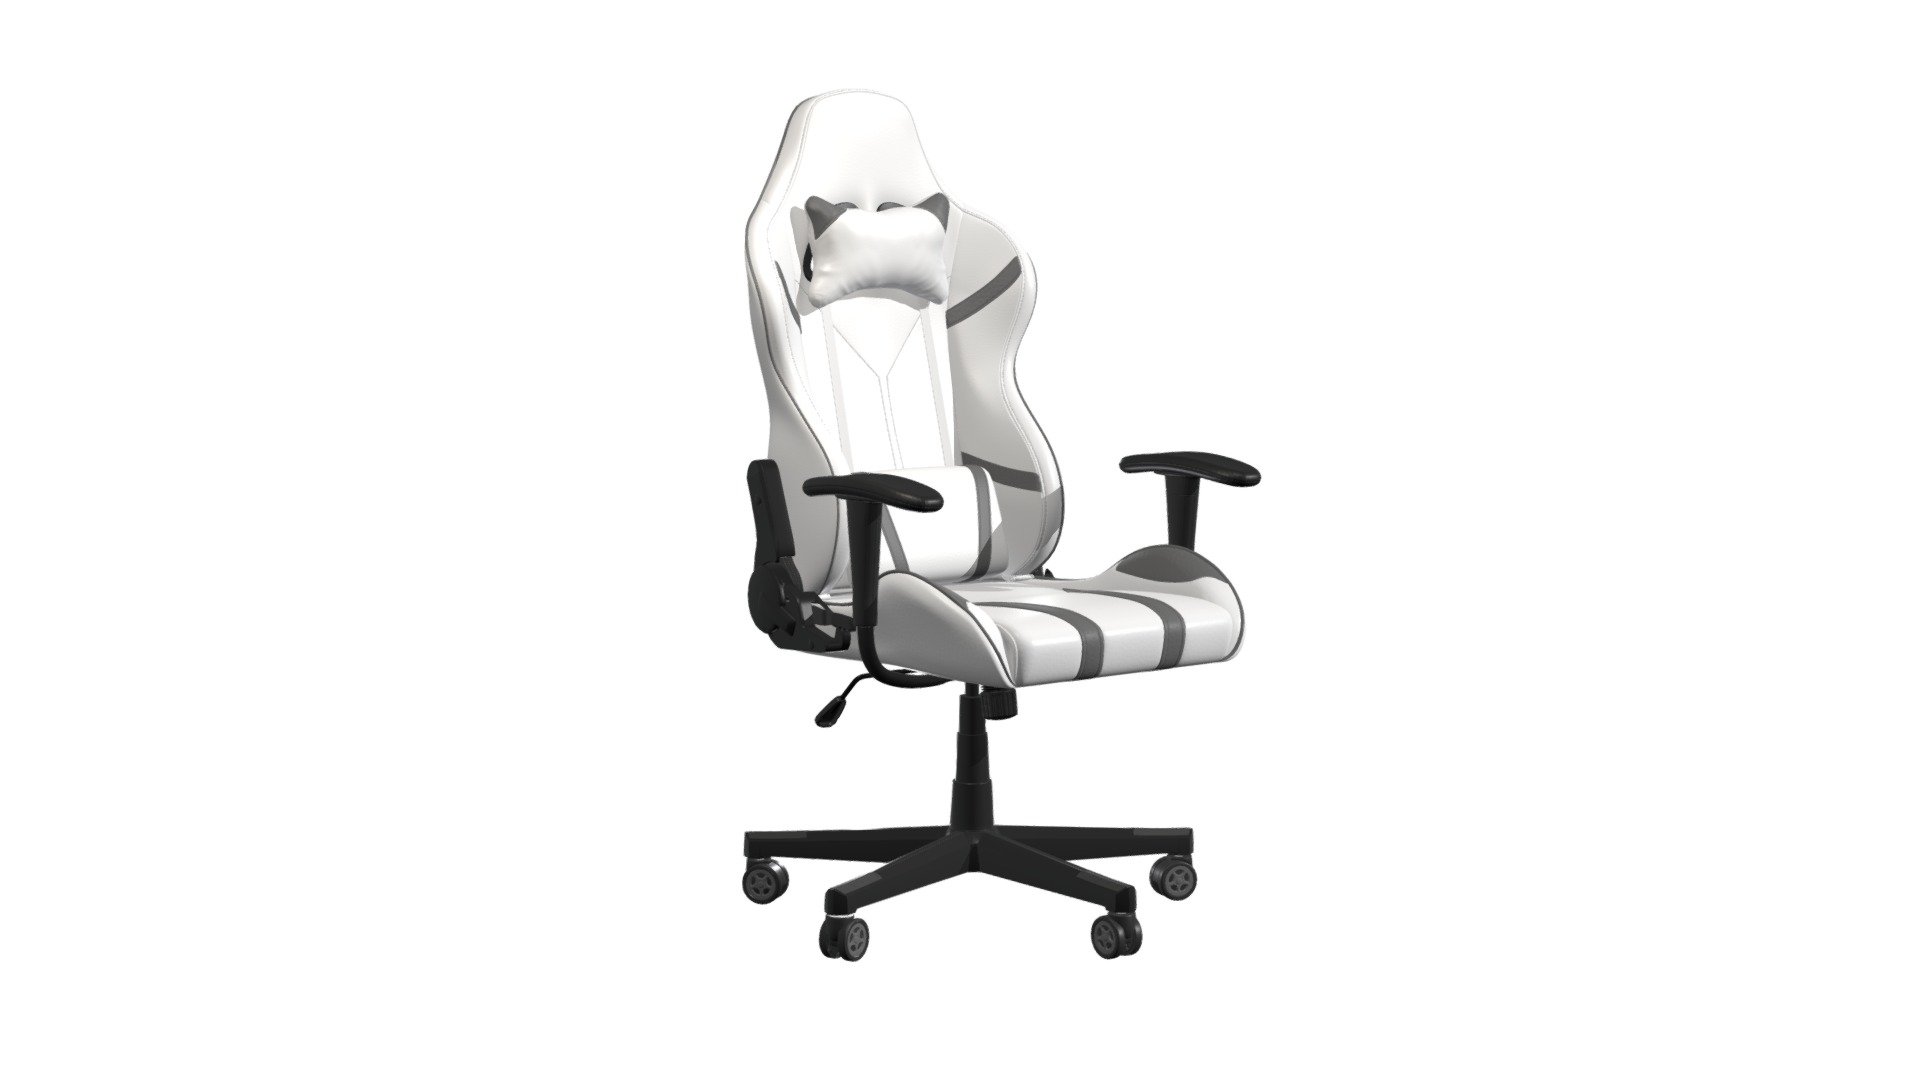 https://zuomod.com/android-gaming-chair-white-gray

Fun, comfortable, and stylish, the Android Gaming Chair is wrapped in vinyl on a swivel, height adjustable rolling base.  This piece brings modern and minimal style to any work or play station 3d model